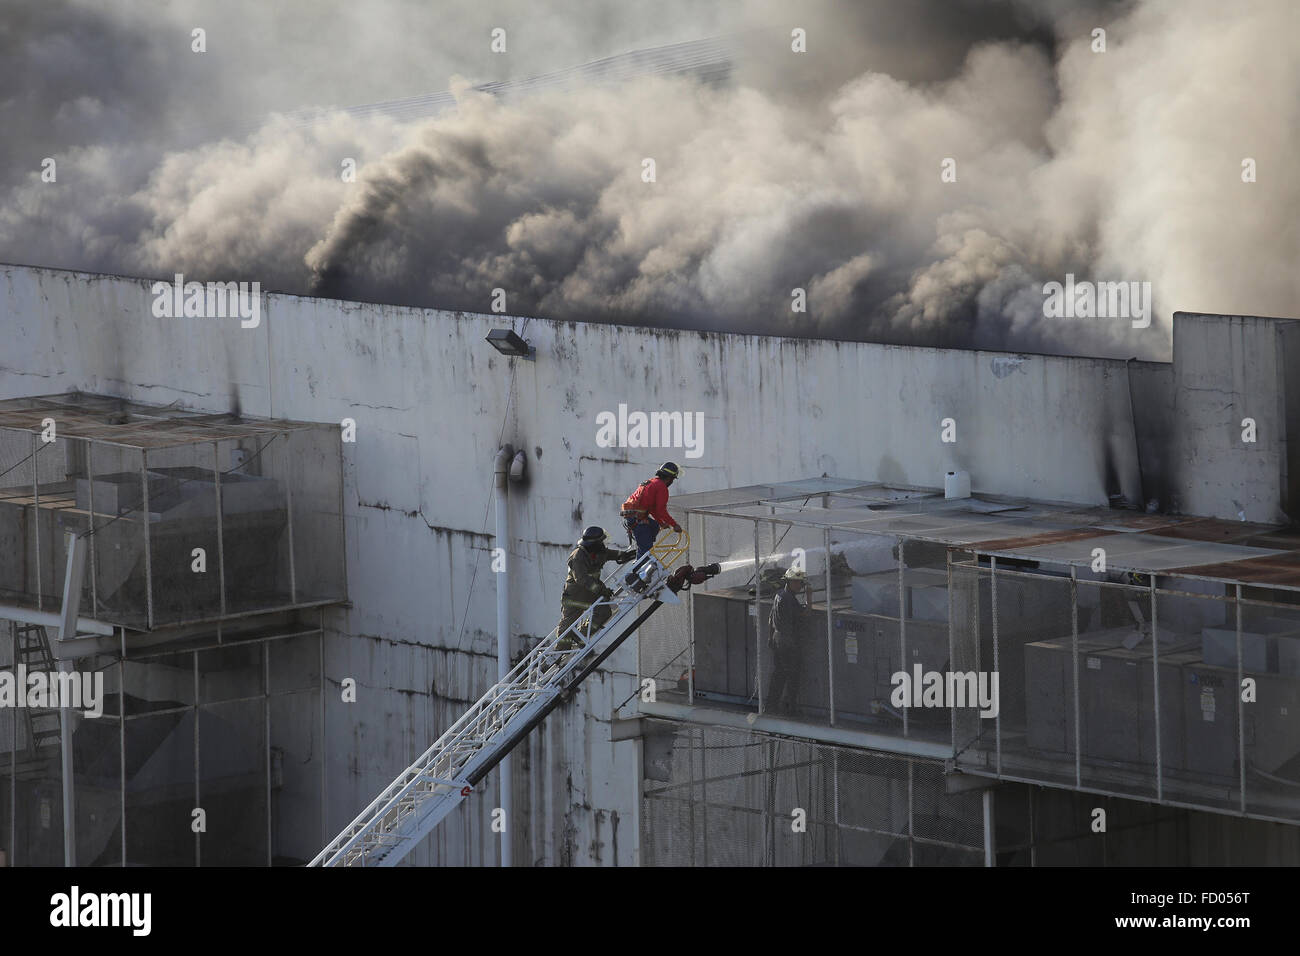 Panama City, Panama. 26th January, 2016. Panama Fire Department members try to extinguish the fire in El Fuerte supermarket in San Miguelito, in Panama City, capital of Panama, Jan. 26, 2016. National Director of the Panama Fire Department Jaime Villar said that the fire started about 4:30 early Tuesday. Credit:  Xinhua/Alamy Live News Stock Photo